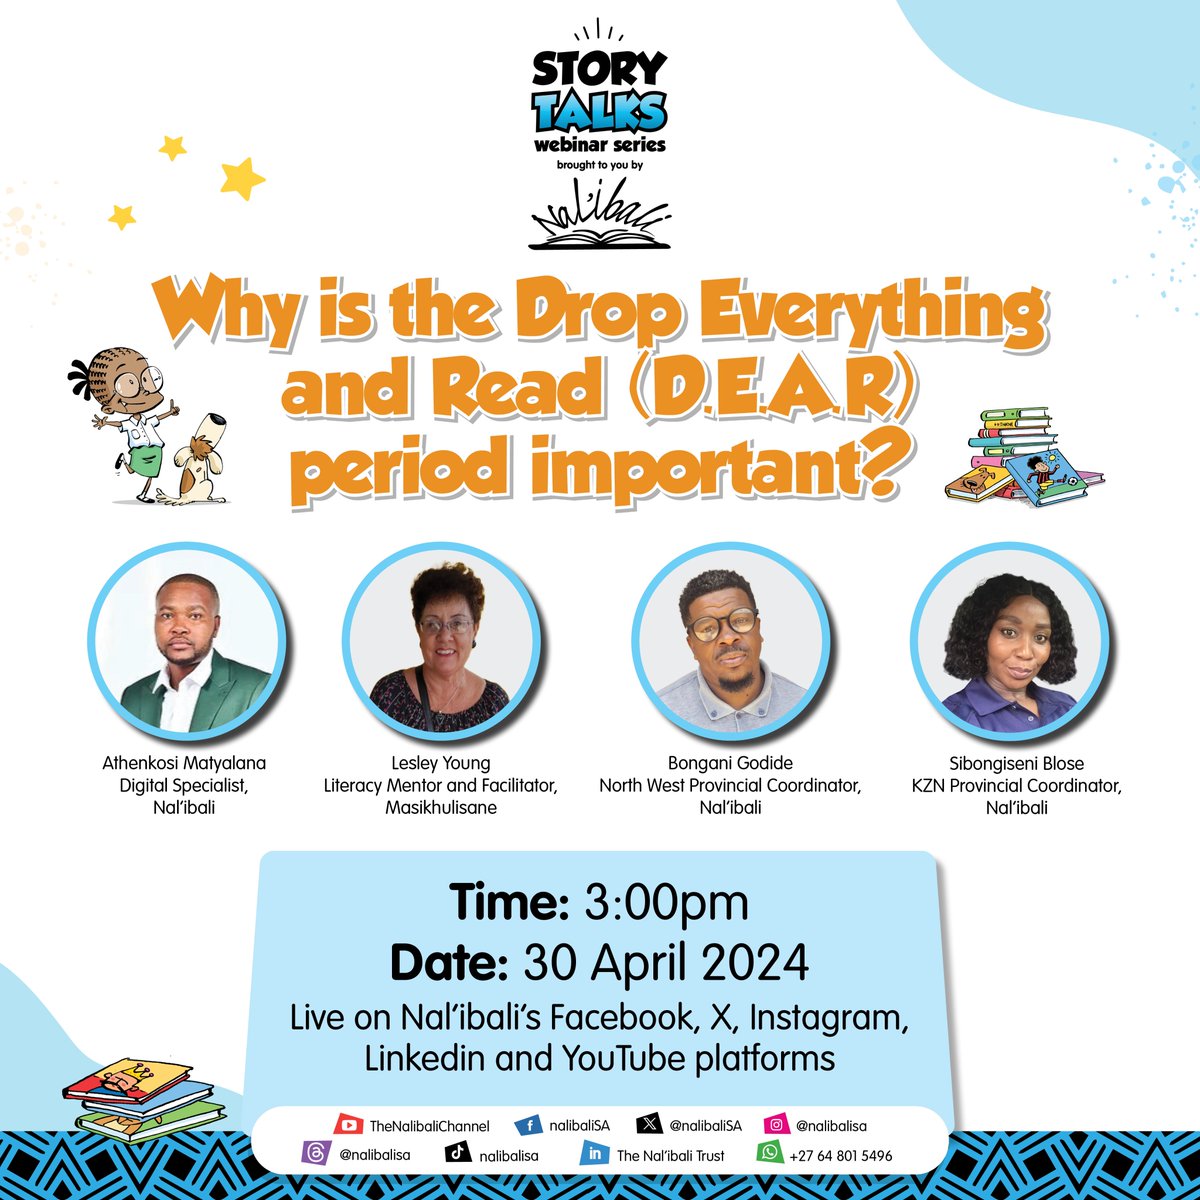 Join us as we discuss the importance and benefits of the Drop Everything and Read (D.E.A.R) period LIVE on Nal'ibali's Facebook, X, Instagram, Linkedin, and YouTube platforms at 3:00 pm on 30 April 2024!! For reading materials that you can use during the D.E.A.R period, download…